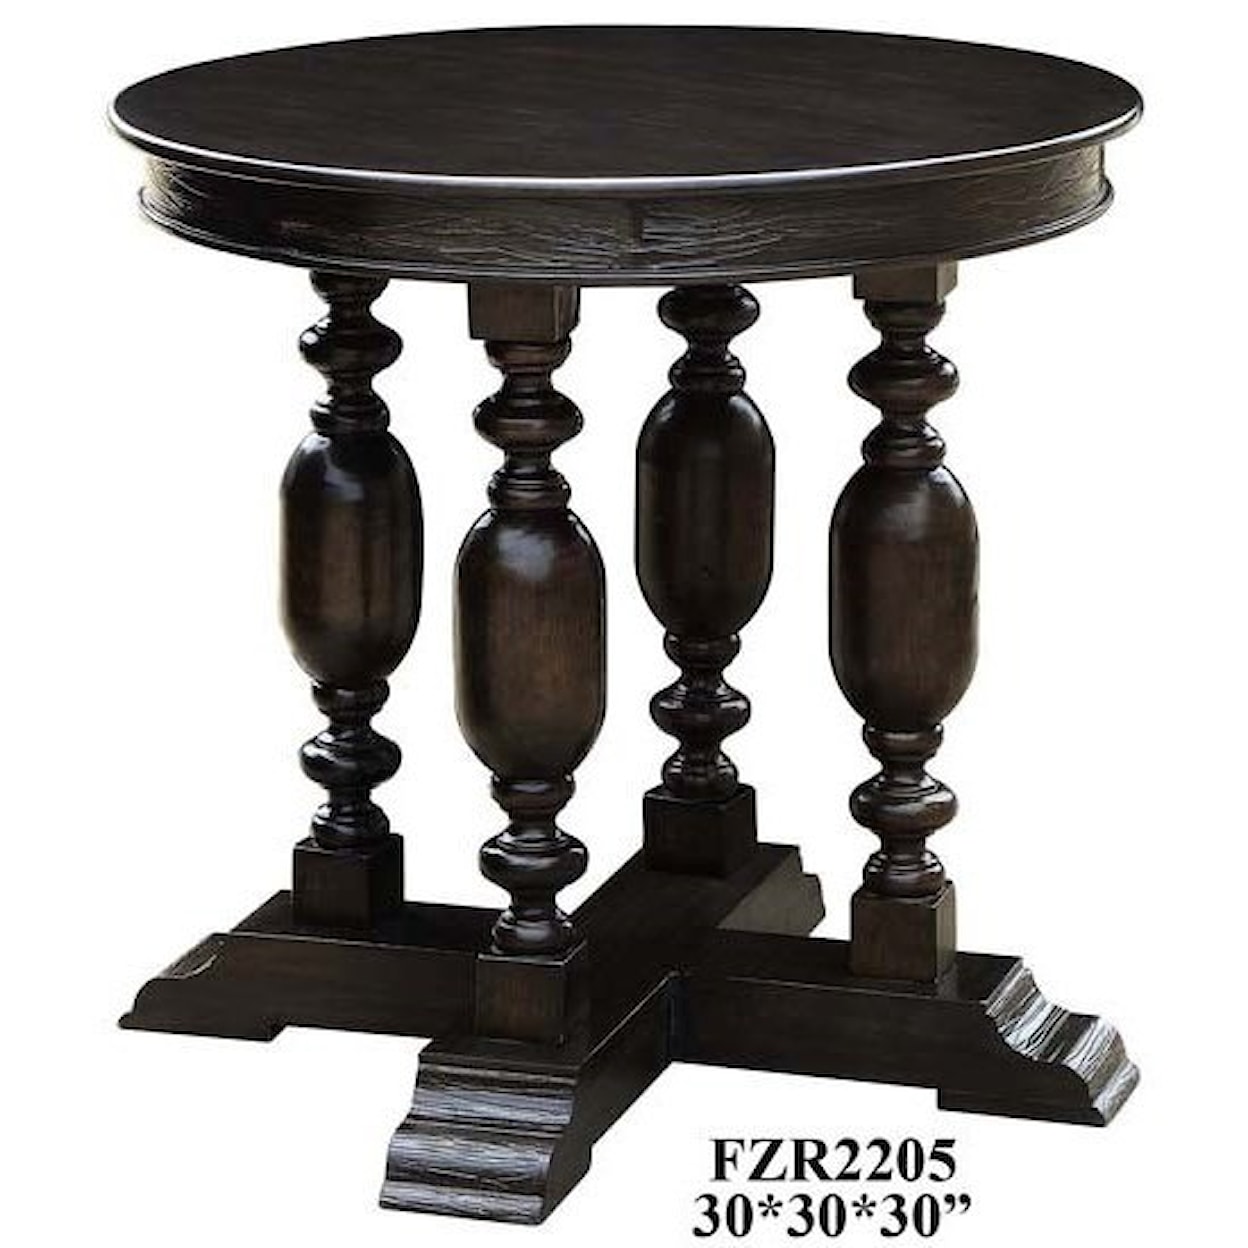 Crestview Collection Accent Furniture Empire 4 Turned Post Foyer Table in Rich Jac